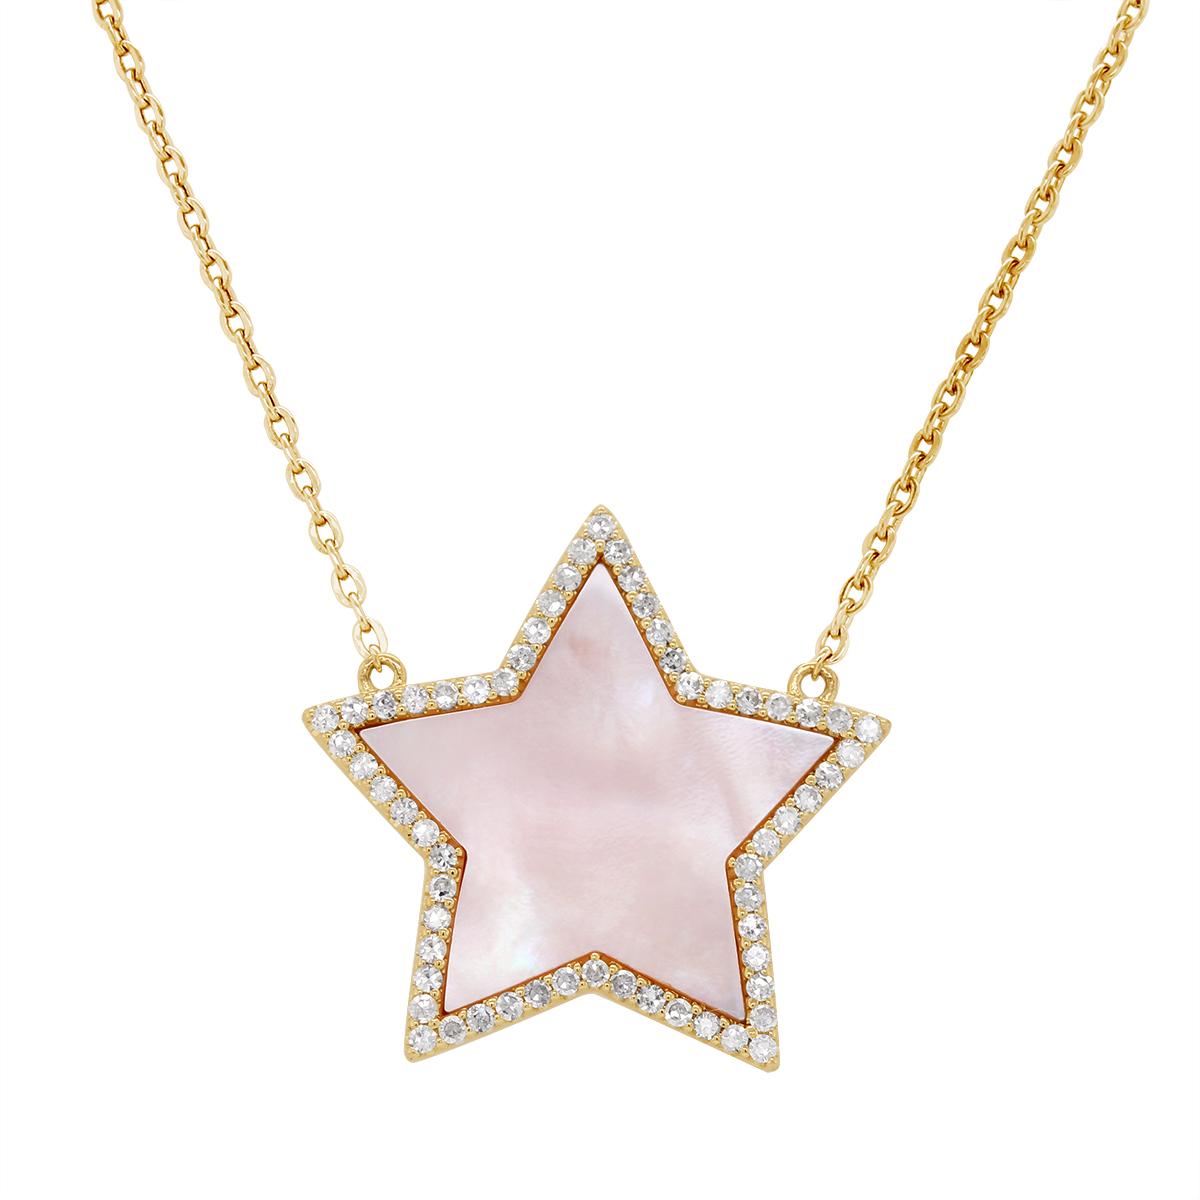 YELLOW GOLD STAR PENDANT WITH MOTHER OF PEARL AND DIAMONDS, .36 CT TW -  Howard\'s Jewelry Center